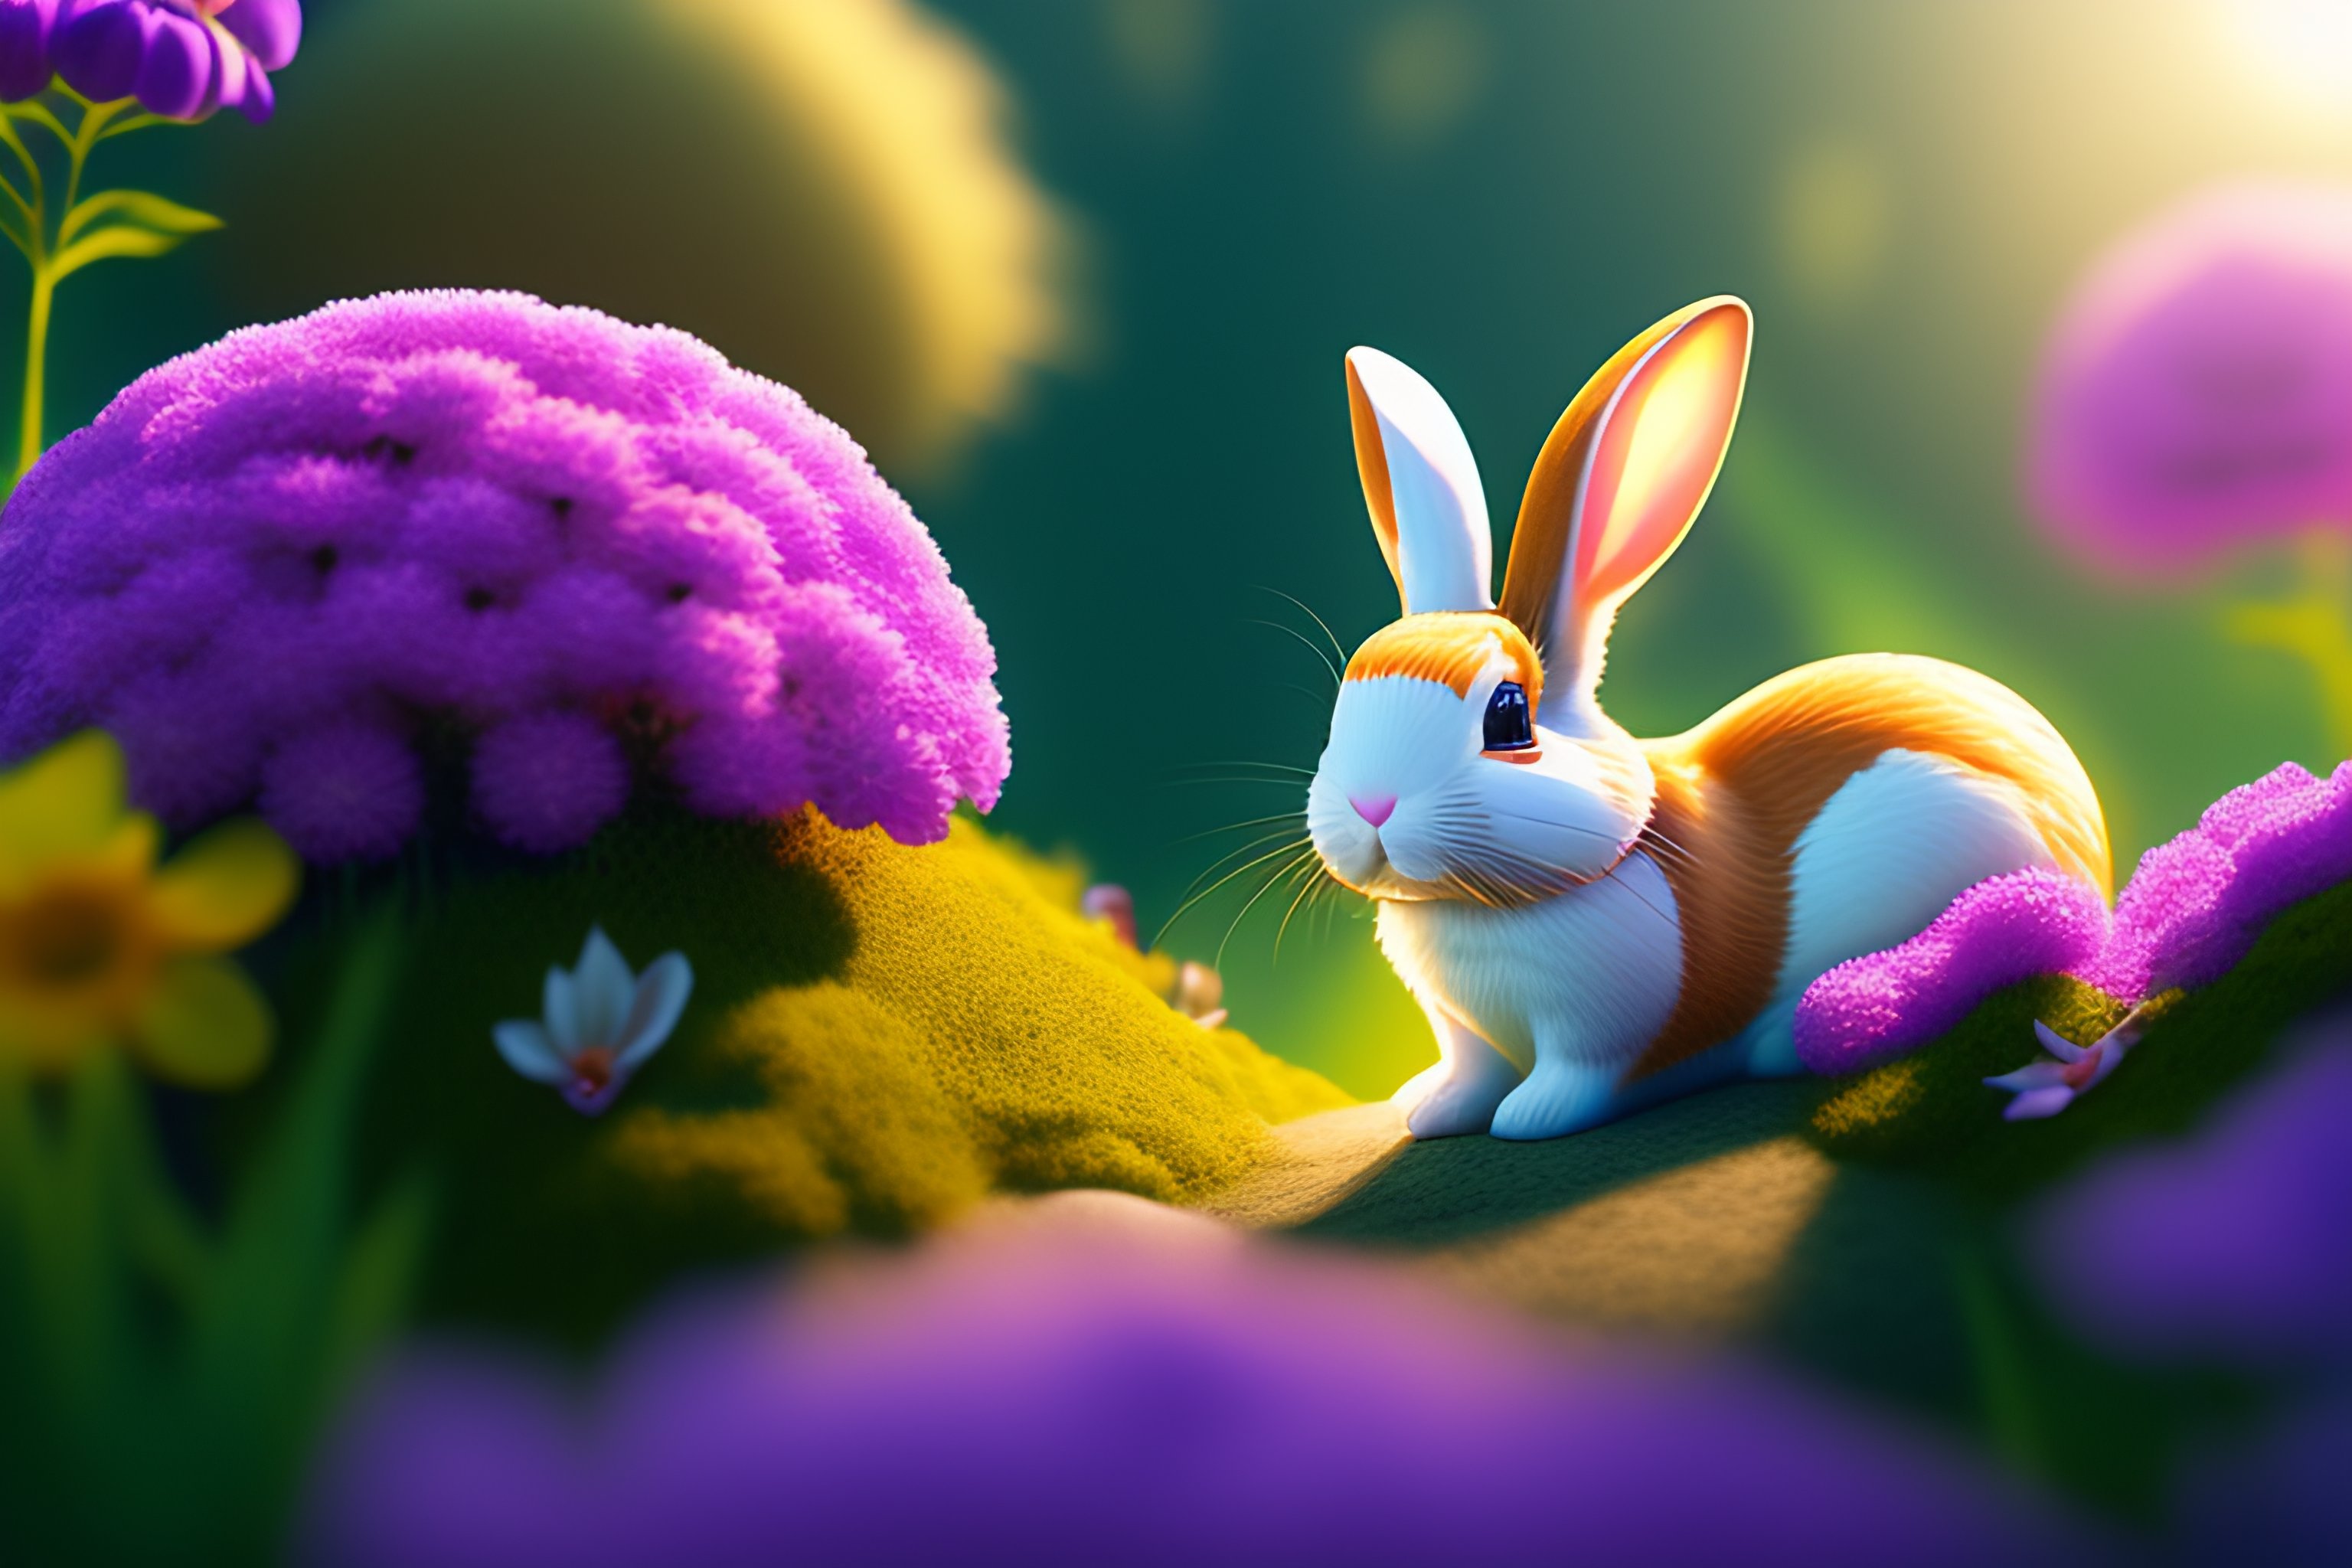 Lexica - Adorable beautiful curious rabbit and cute animal in